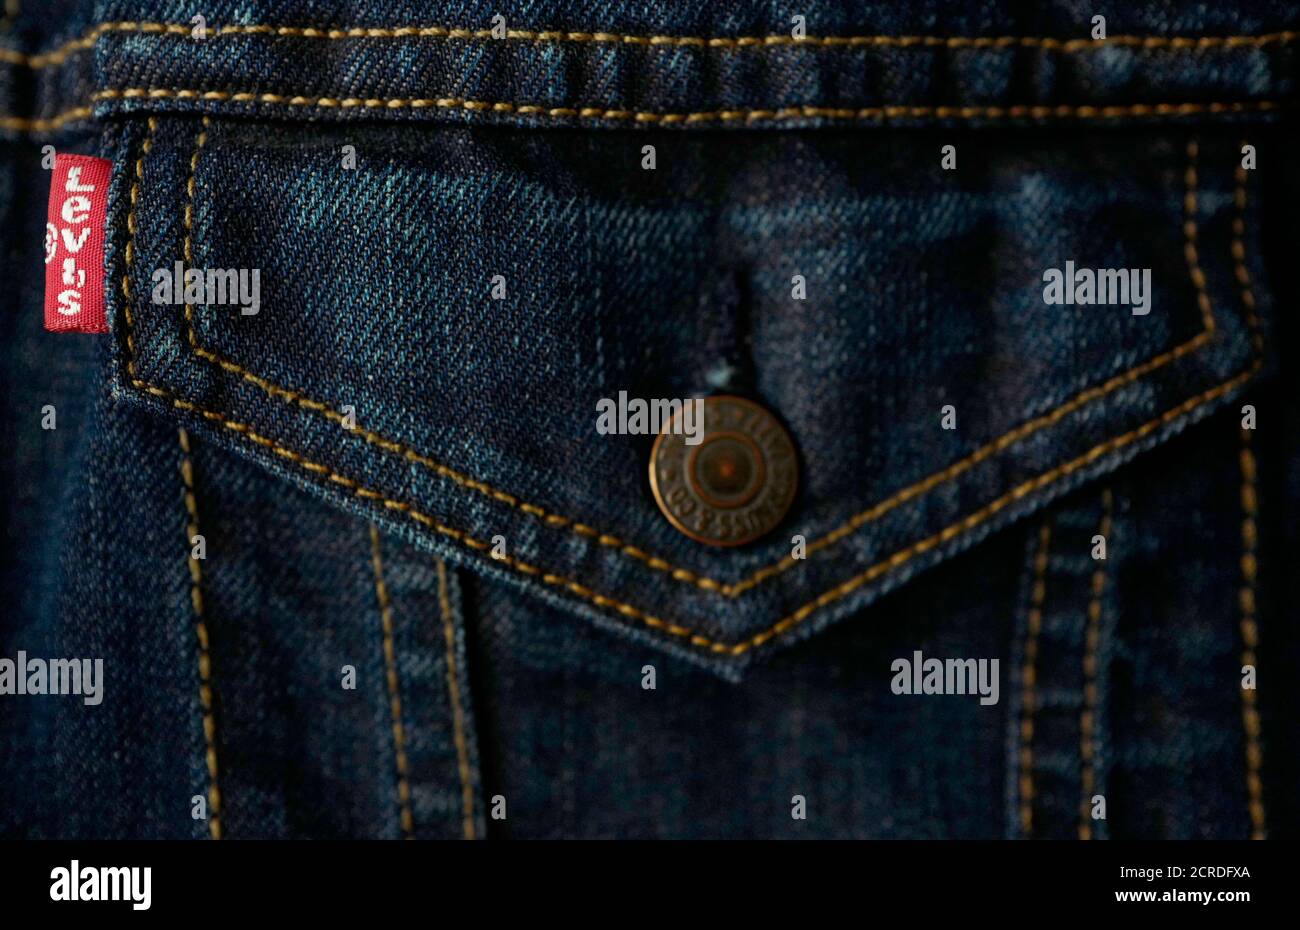 Levis Denim Jacket High Resolution Stock Photography and Images - Alamy